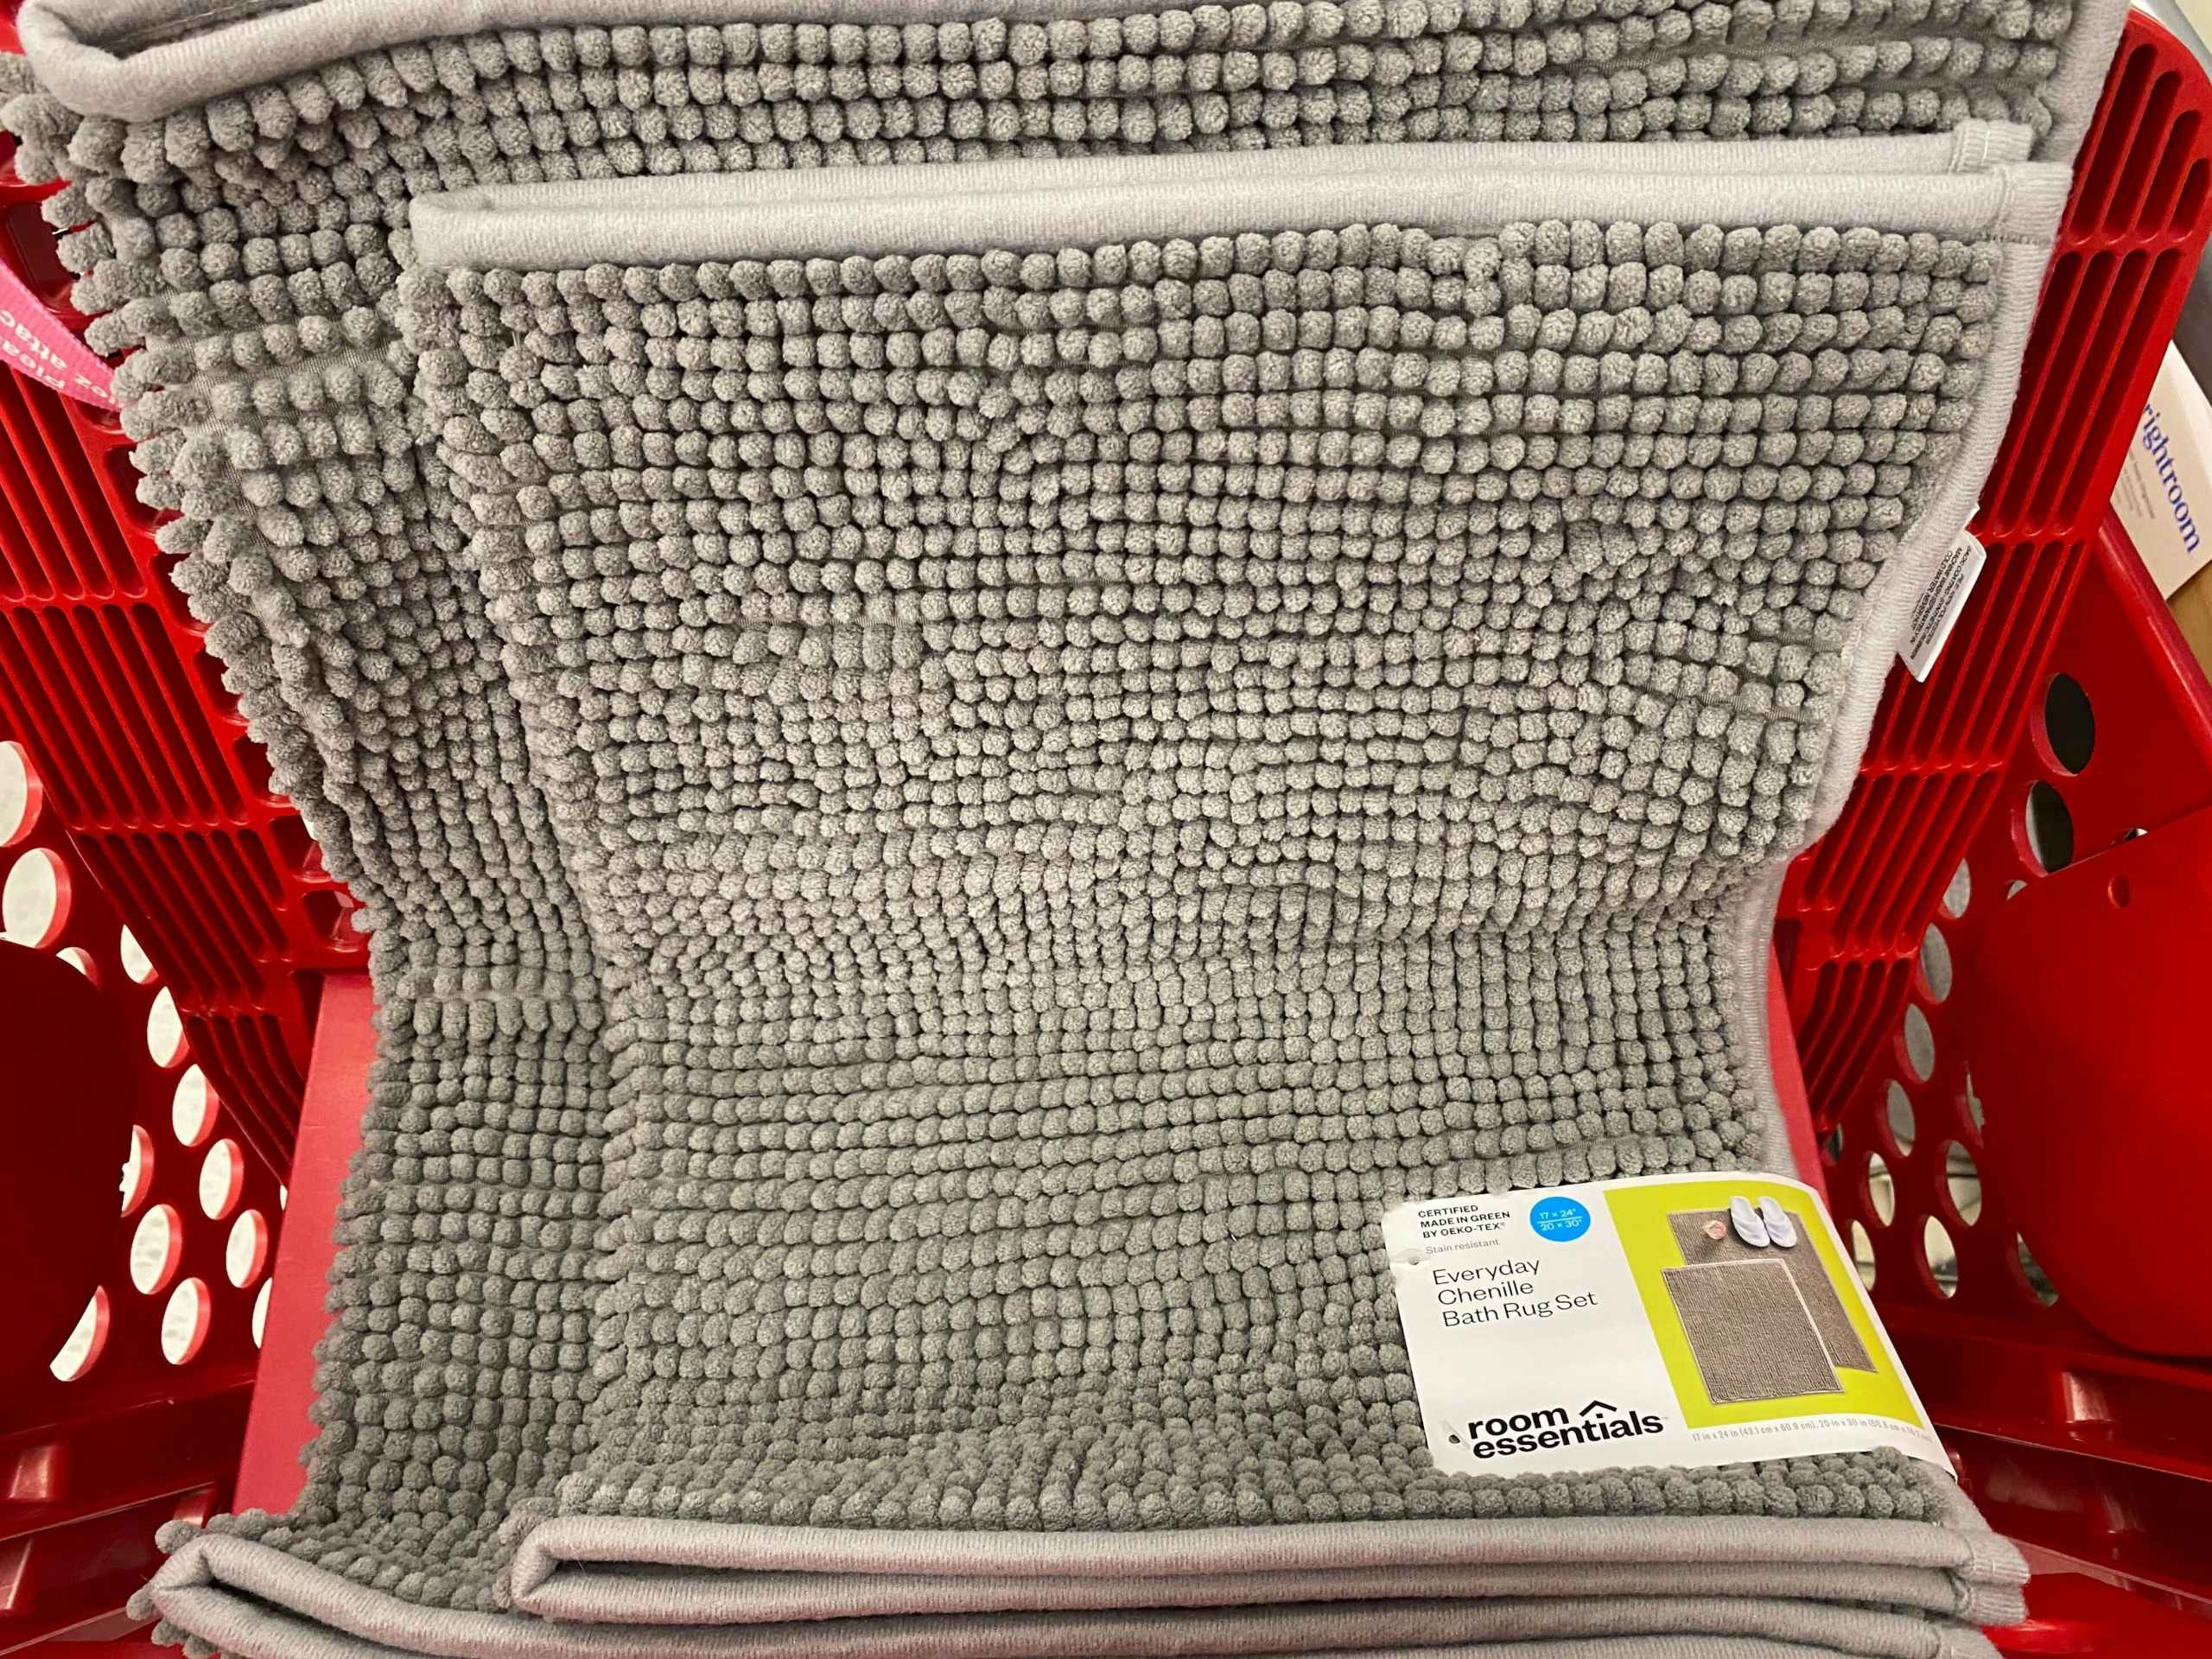 2-pack of everyday chenille bath rugs in a target cart